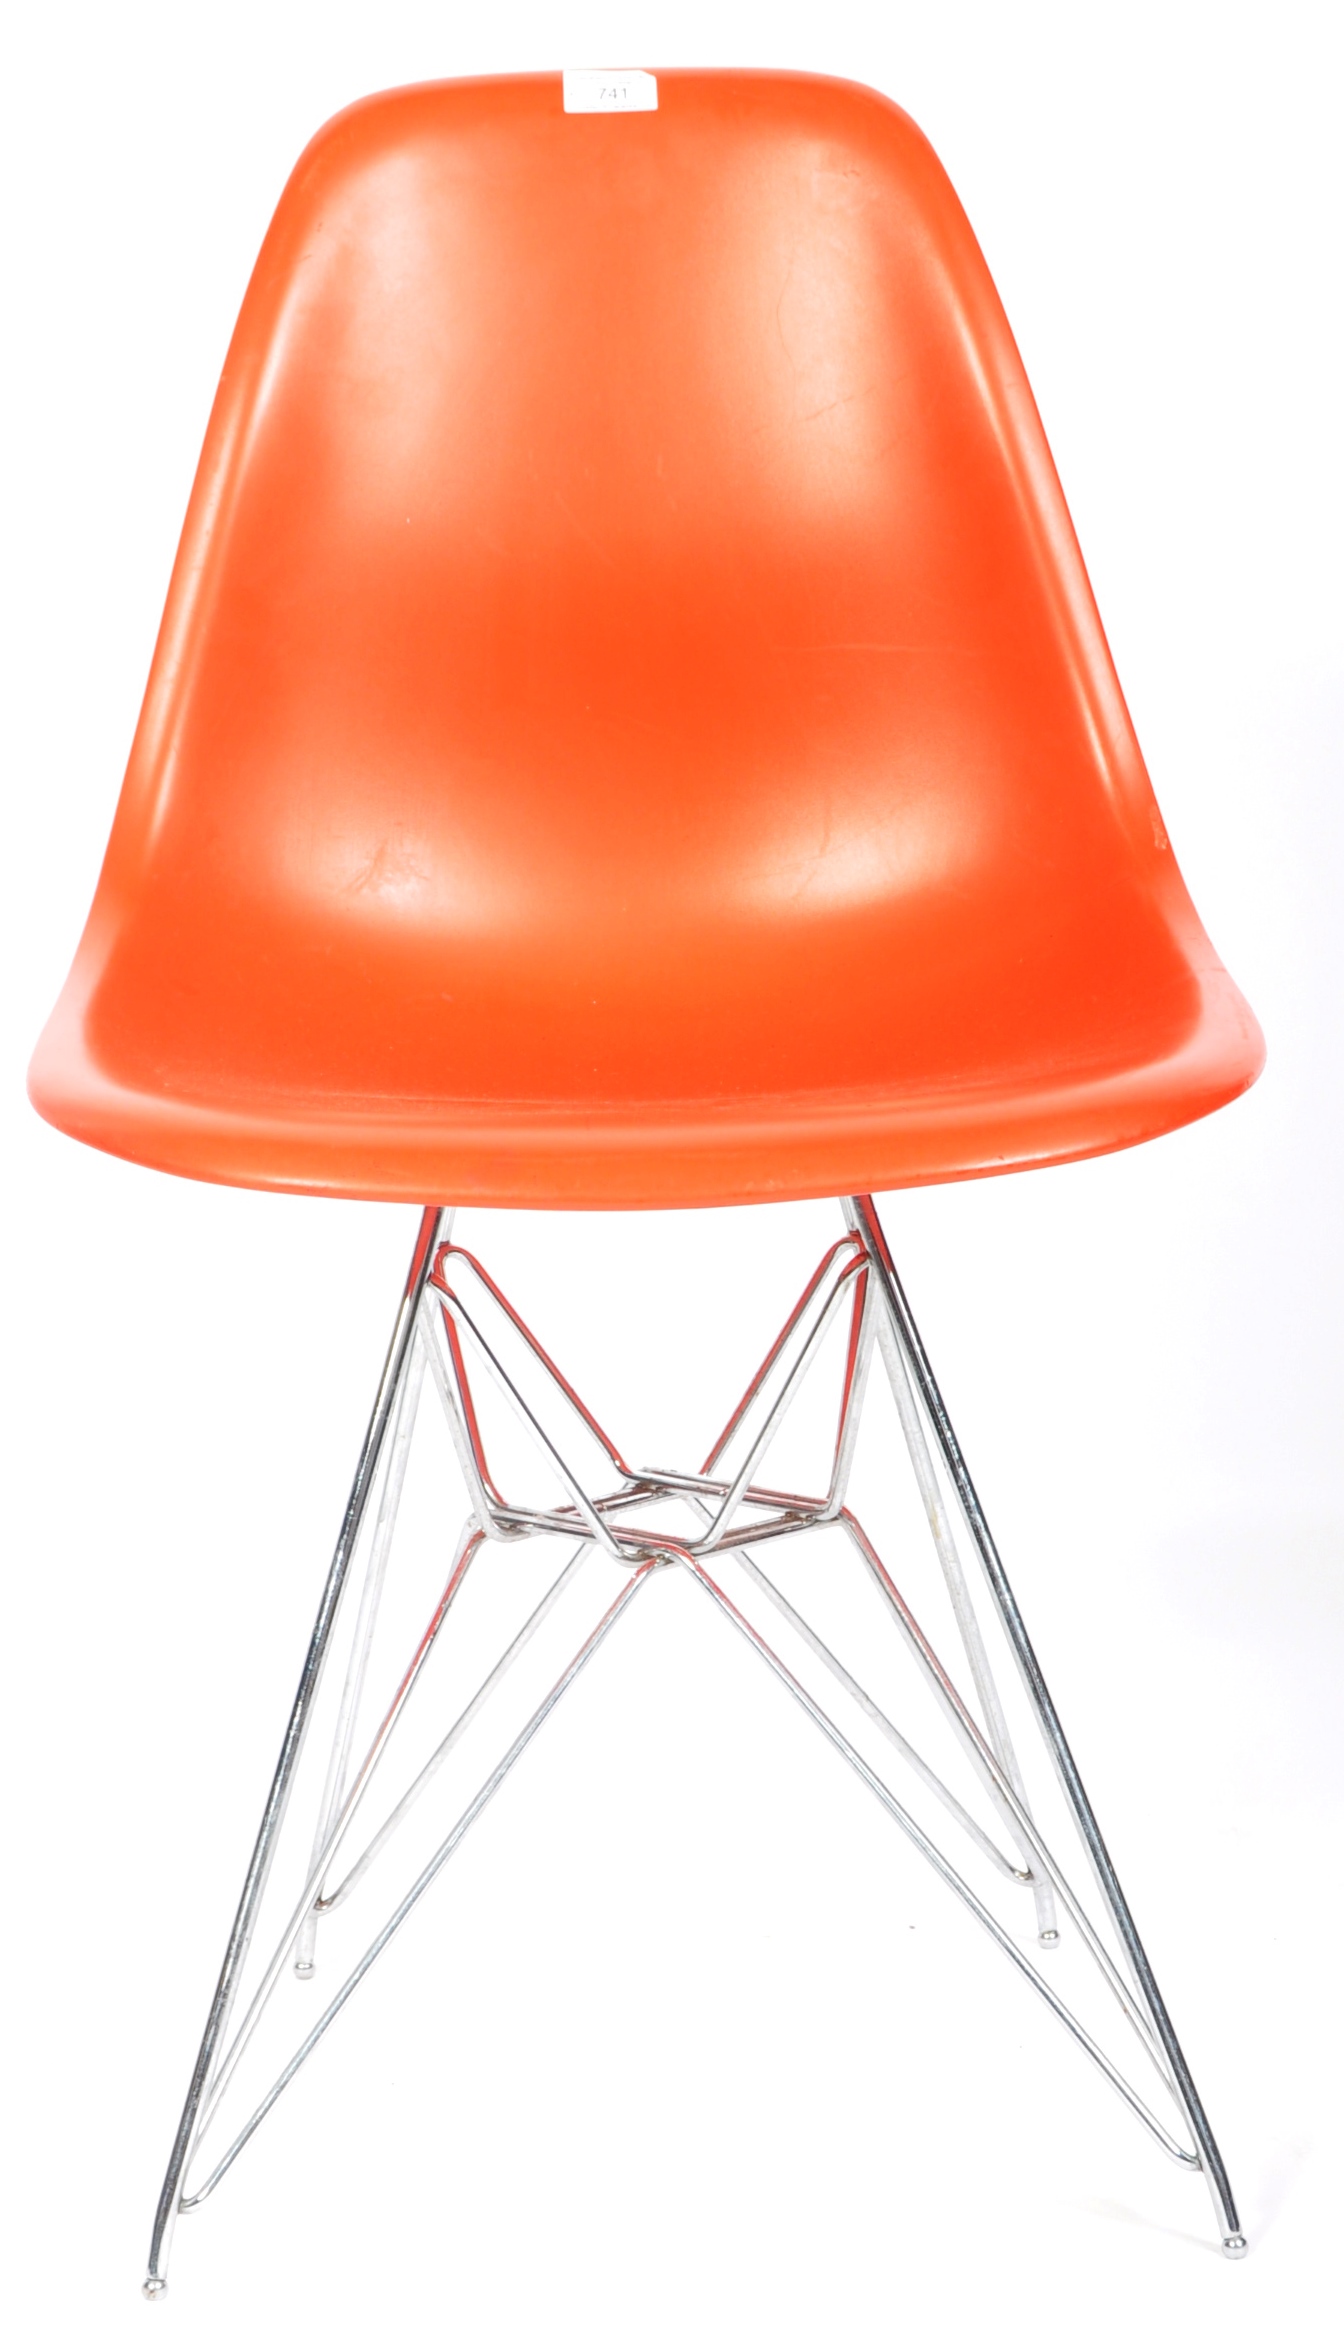 CHARLES & RAY EAMES FOR VITRA - DSR EAMES PLASTIC CHAIR - Image 9 of 10